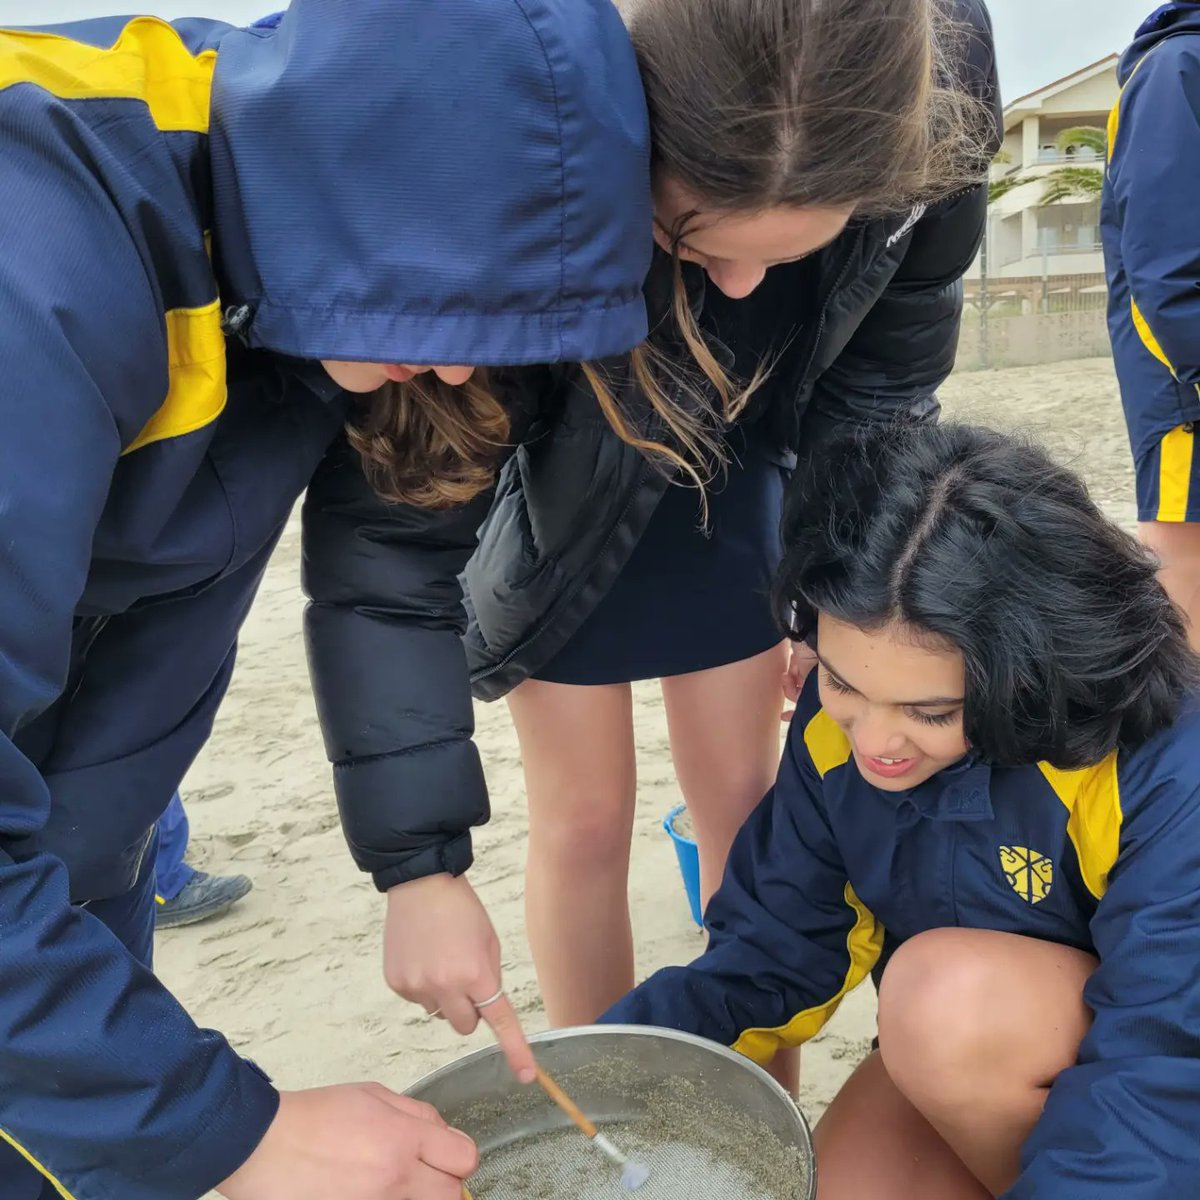 #GibraltarMarineScienceStudies 

Science Week at @PriorParkGib
Delighted to form a part of this fantastic celebration of the sciences! 

Students conducted #microplastic surveys on #WesternBeach

Techniques & methods applied gave pupils a real taste of proper scientific fieldwork